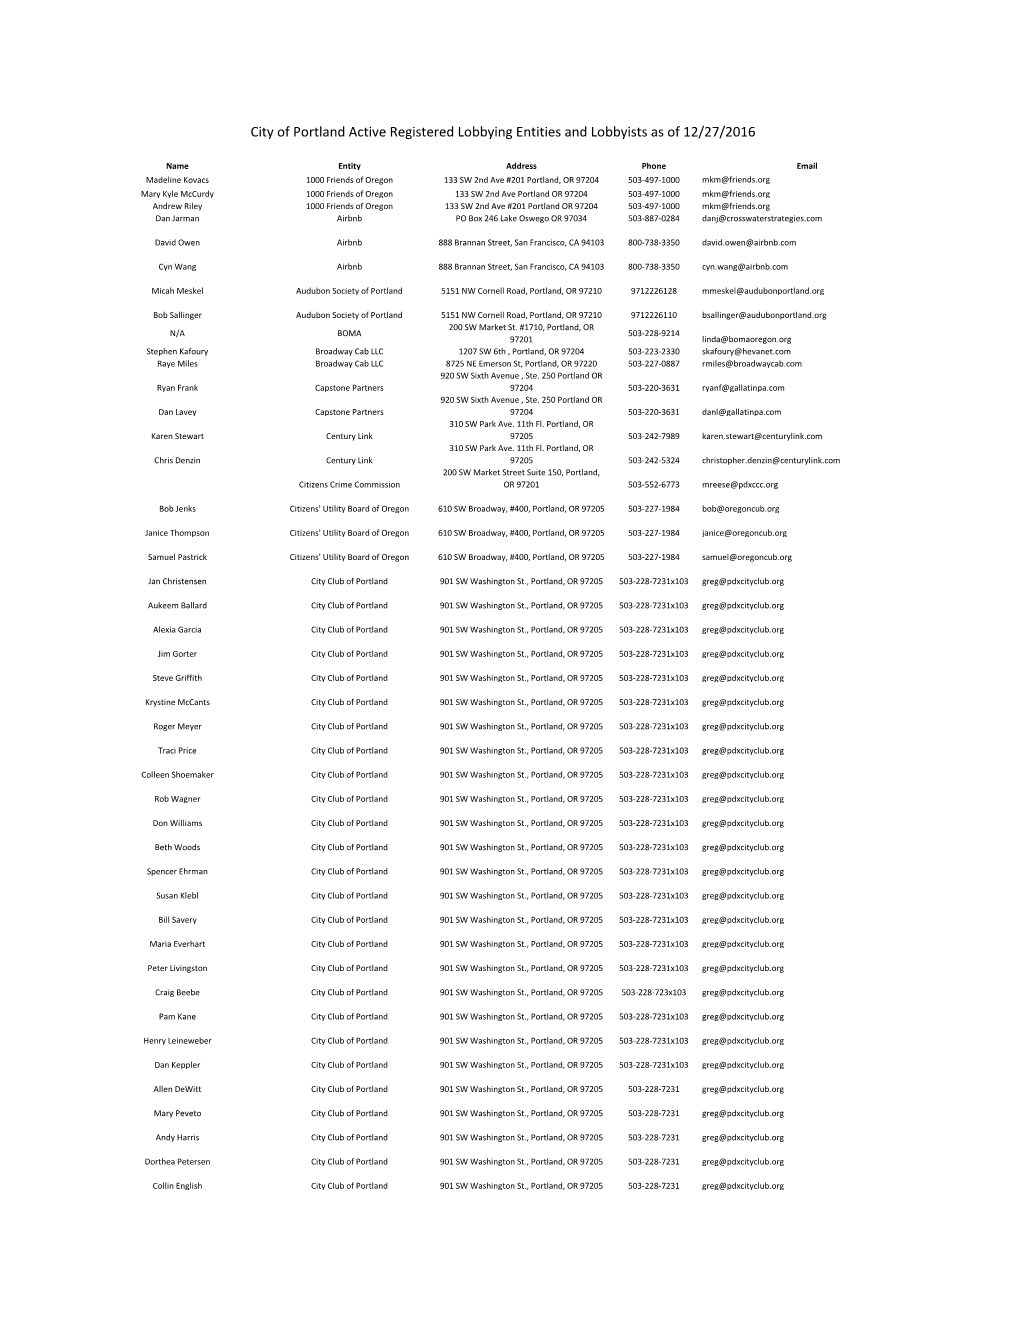 Registered Lobbyists for Q4 2016